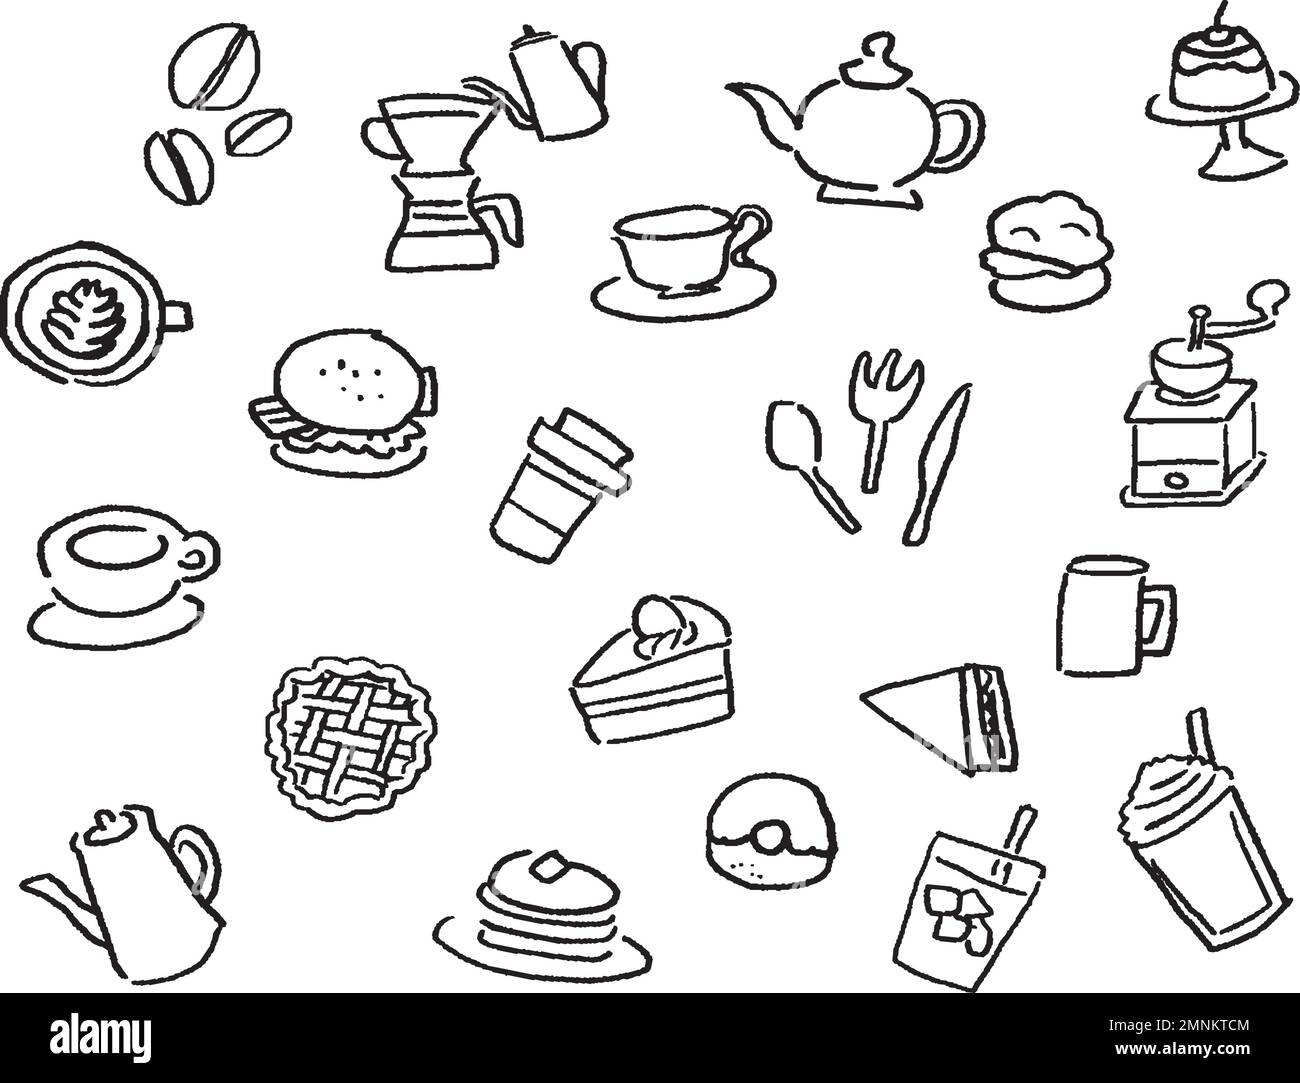 Cafe line drawing icon set. Black and white. Line drawings of various sweets and coffee. Stock Vector